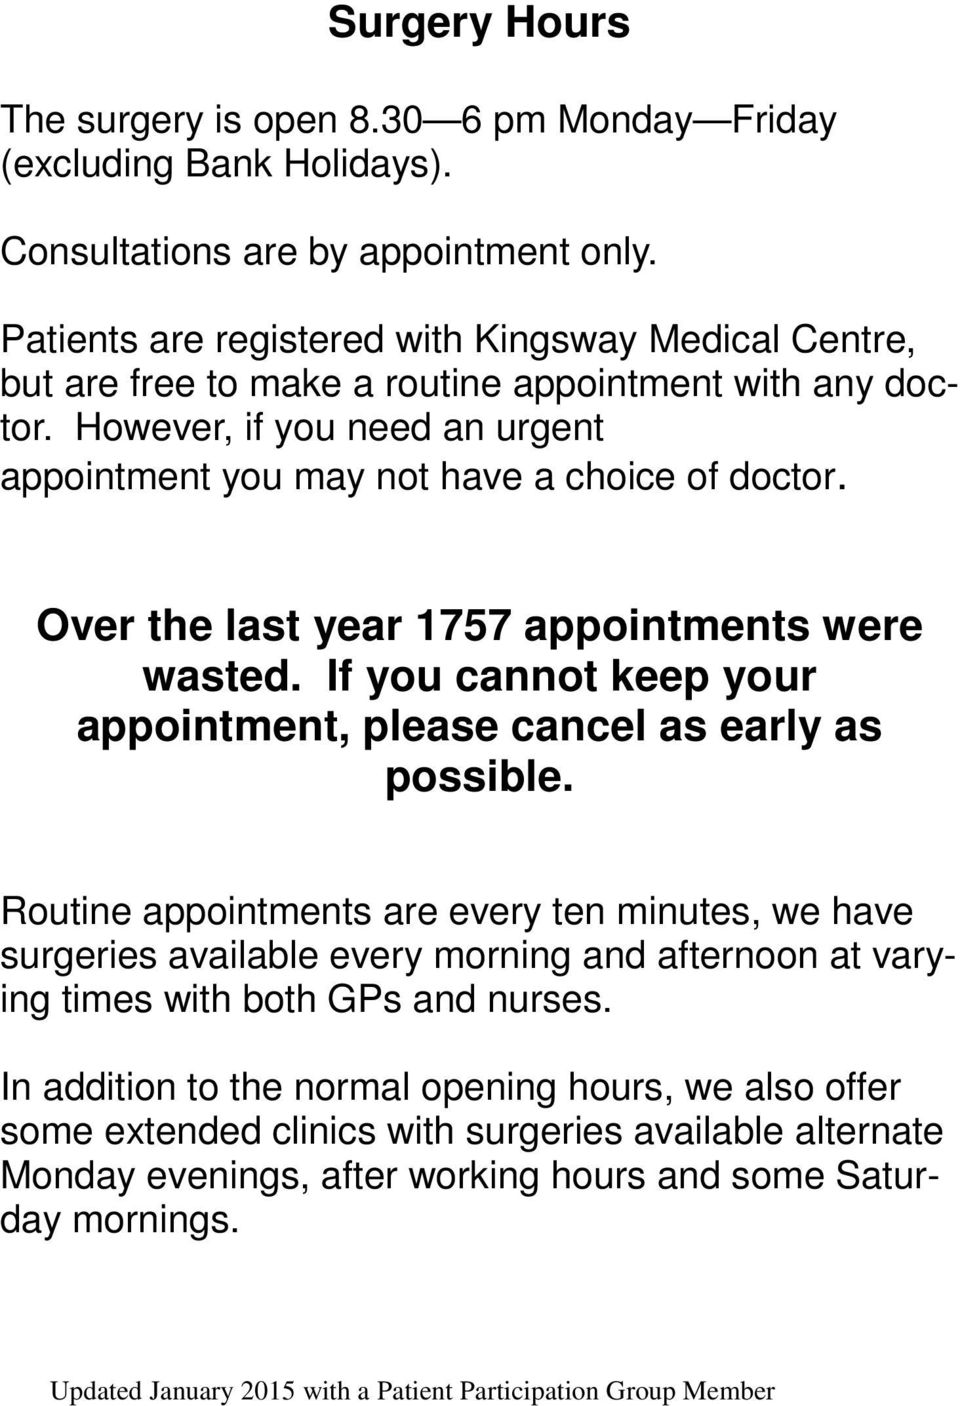 Over the last year 1757 appointments were wasted. If you cannot keep your appointment, please cancel as early as possible.